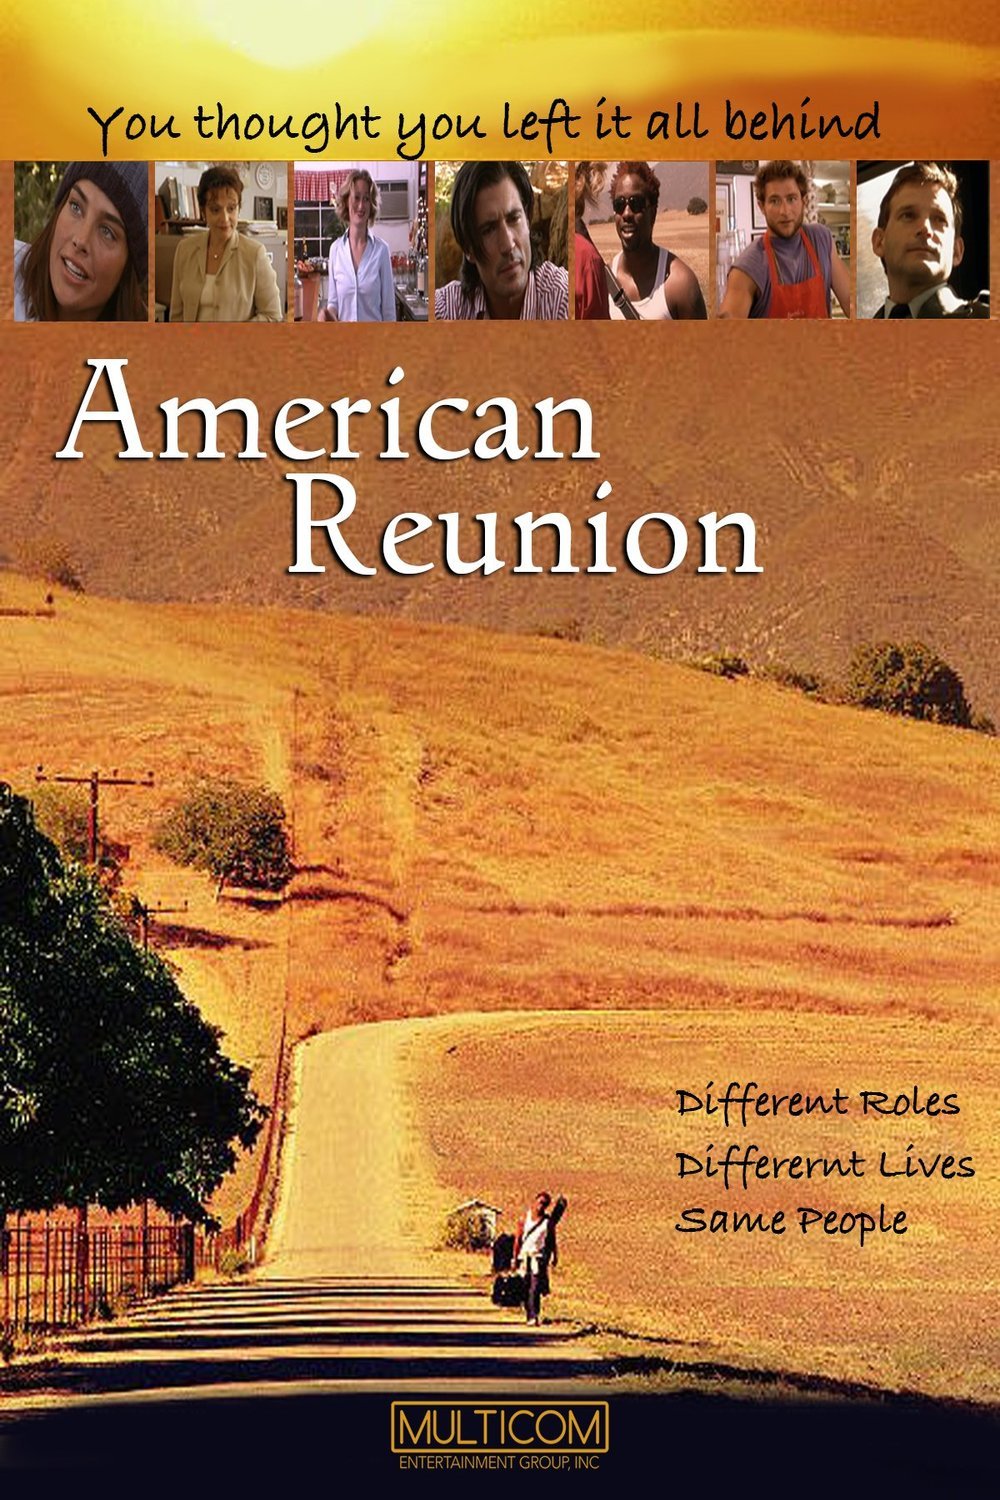 Poster of the movie American Reunion